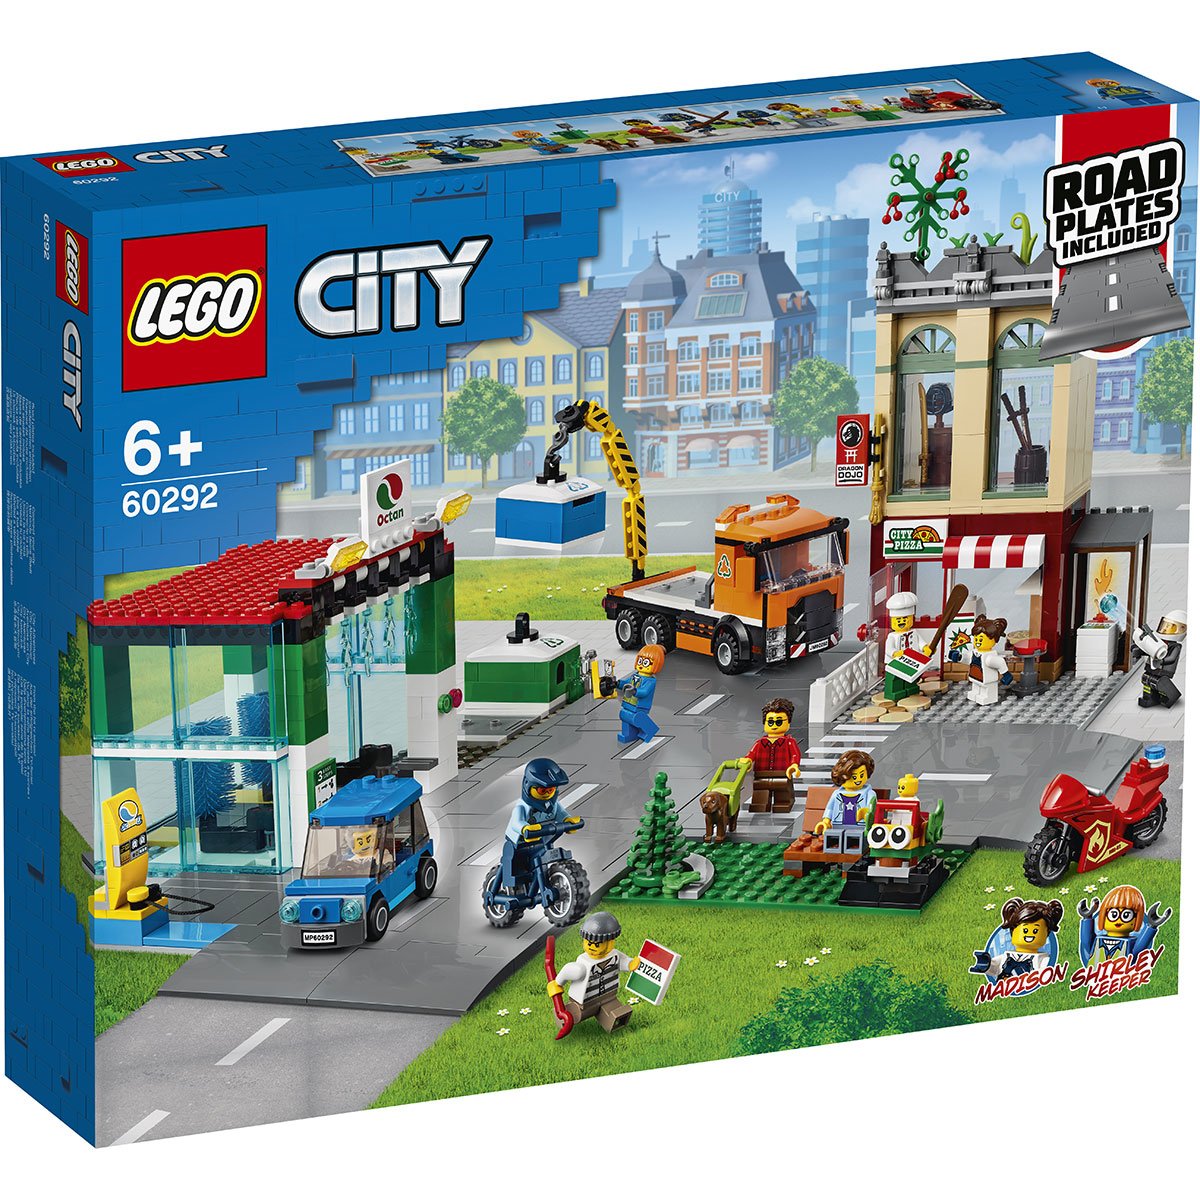 Buy Lego City Square, Multi Color Online at Low Prices in India - Amazon.in